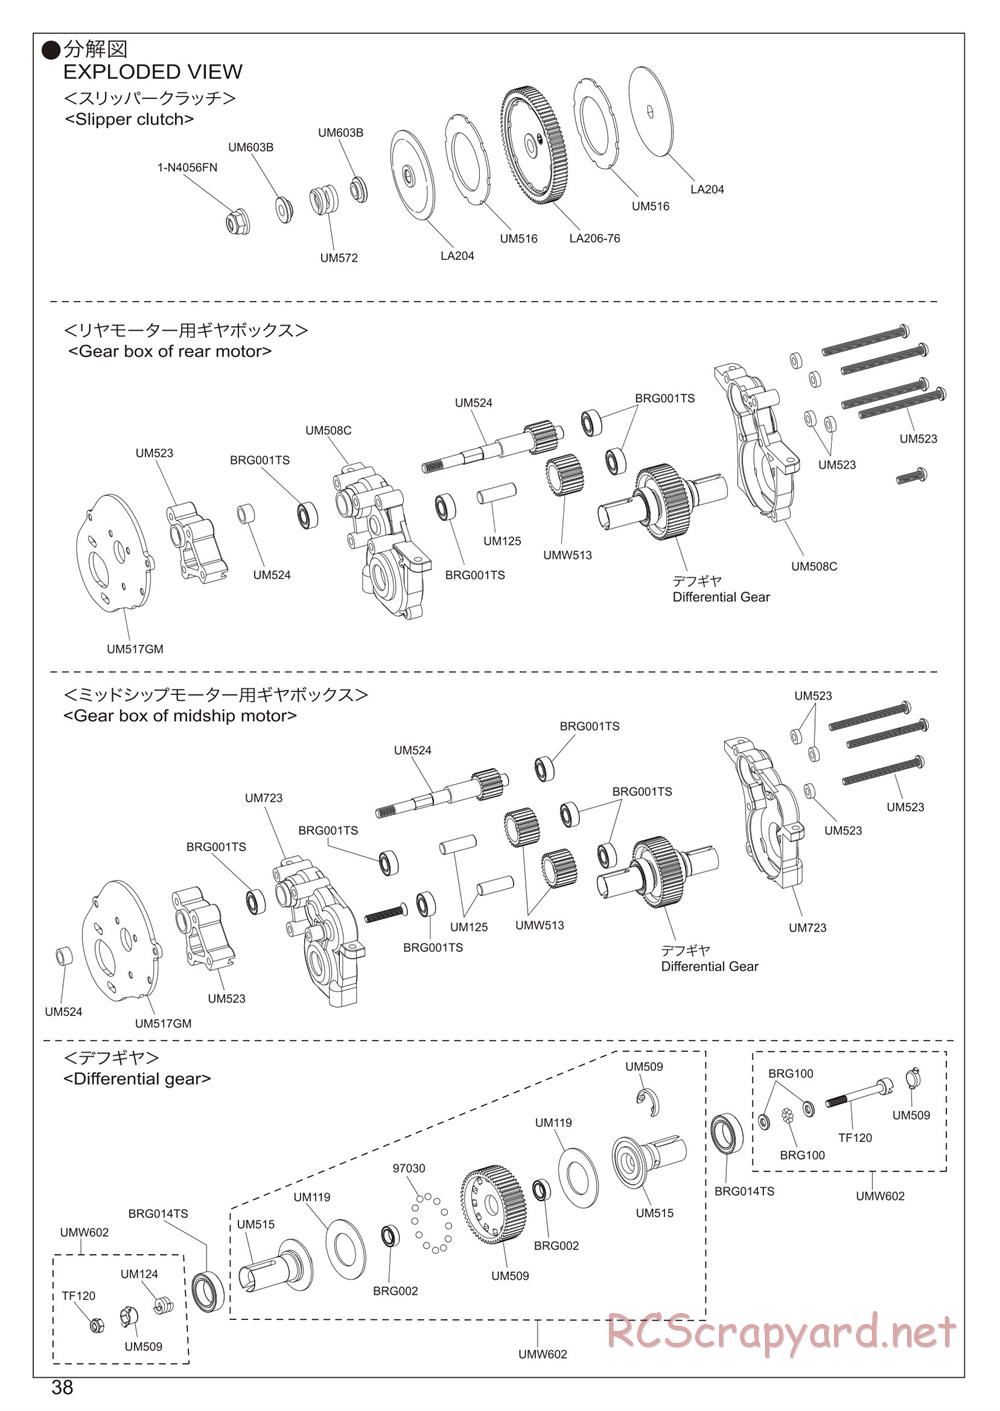 Kyosho - Ultima RB6 (2015) - Exploded Views - Page 2